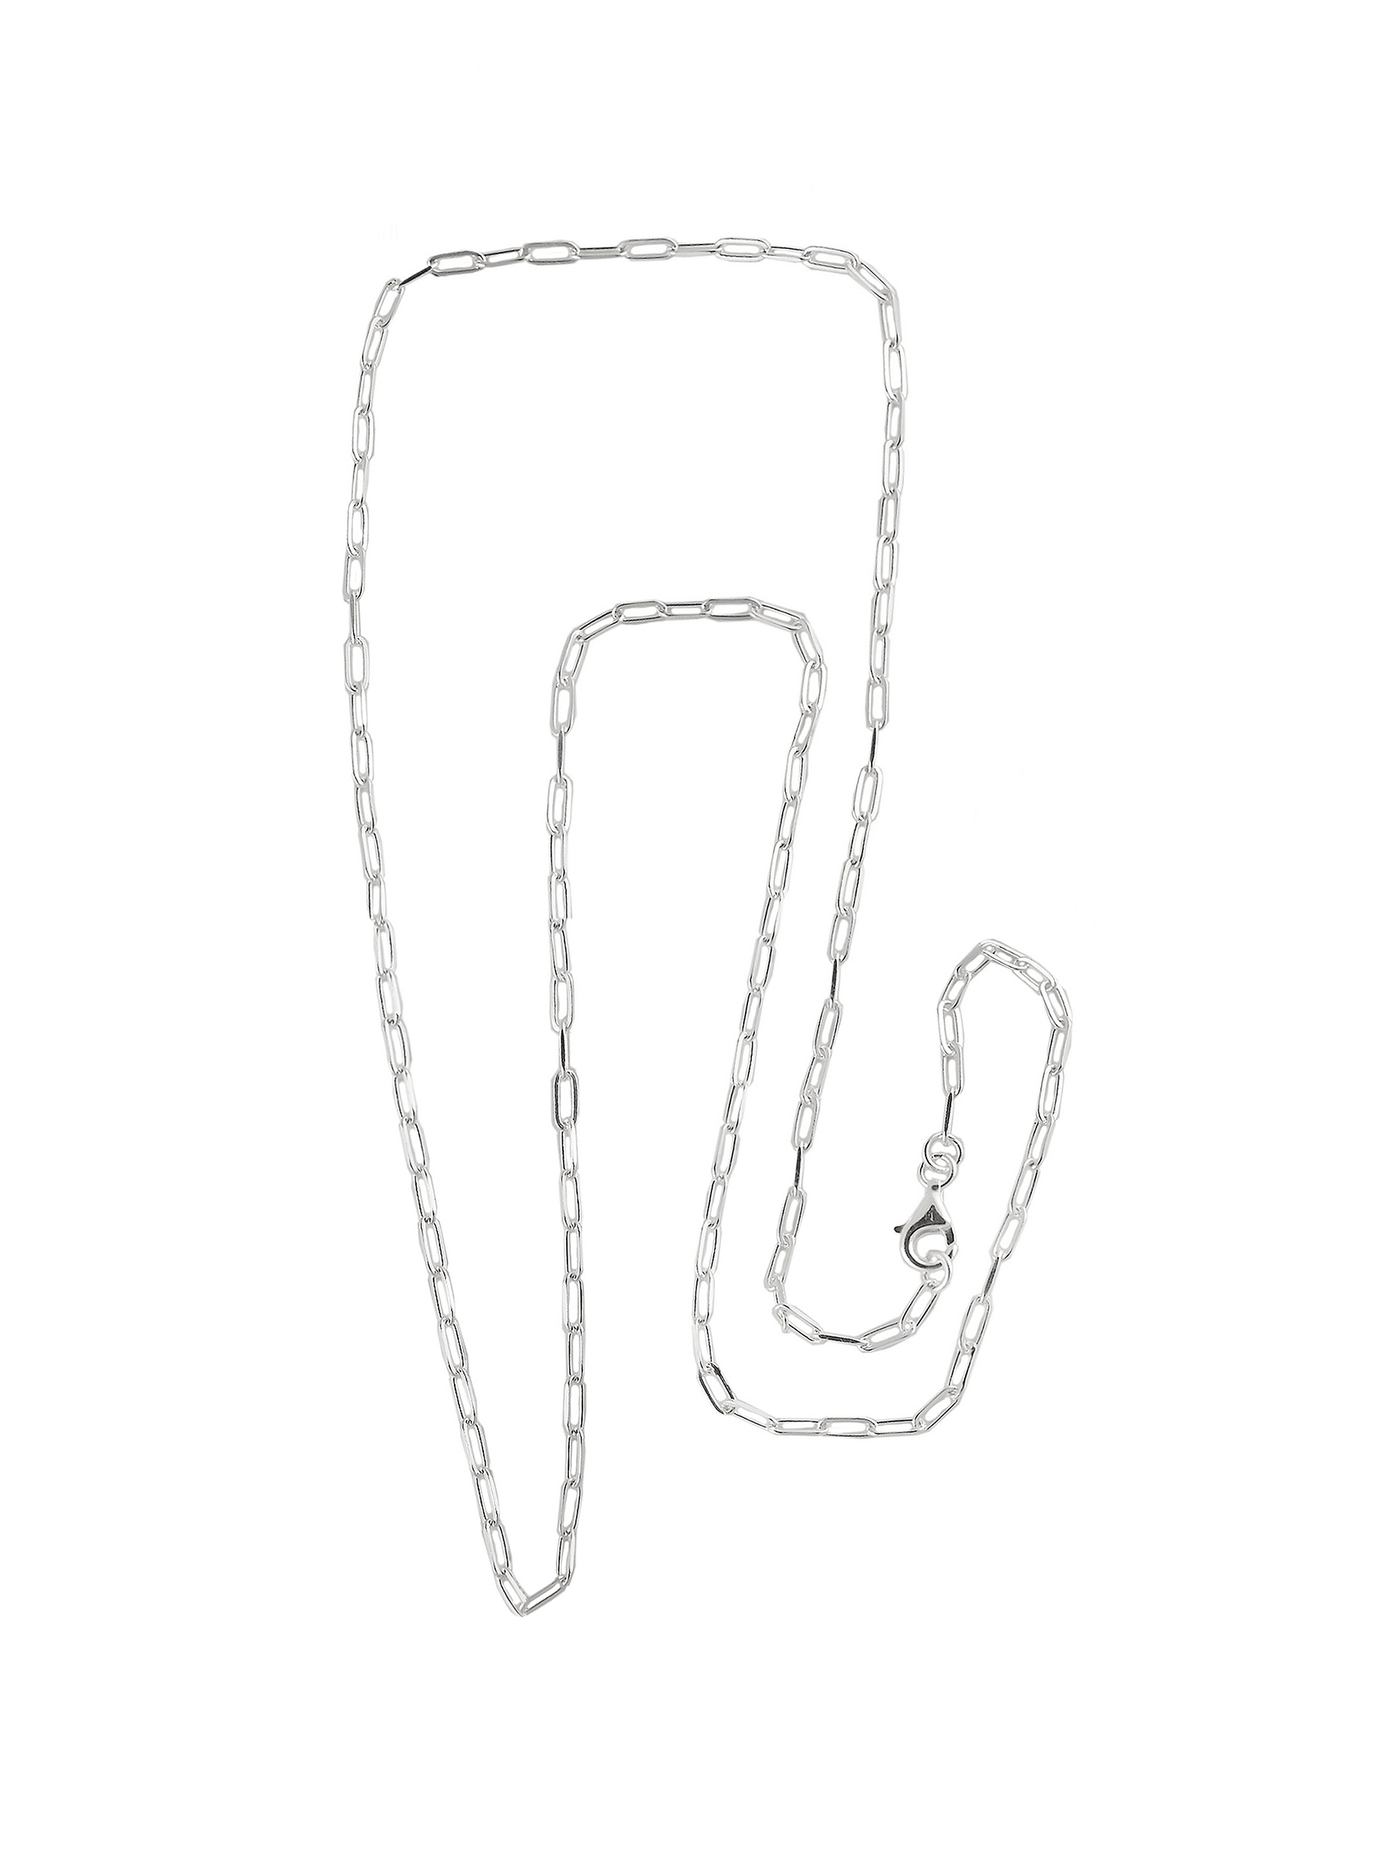 Chain necklace. Silver